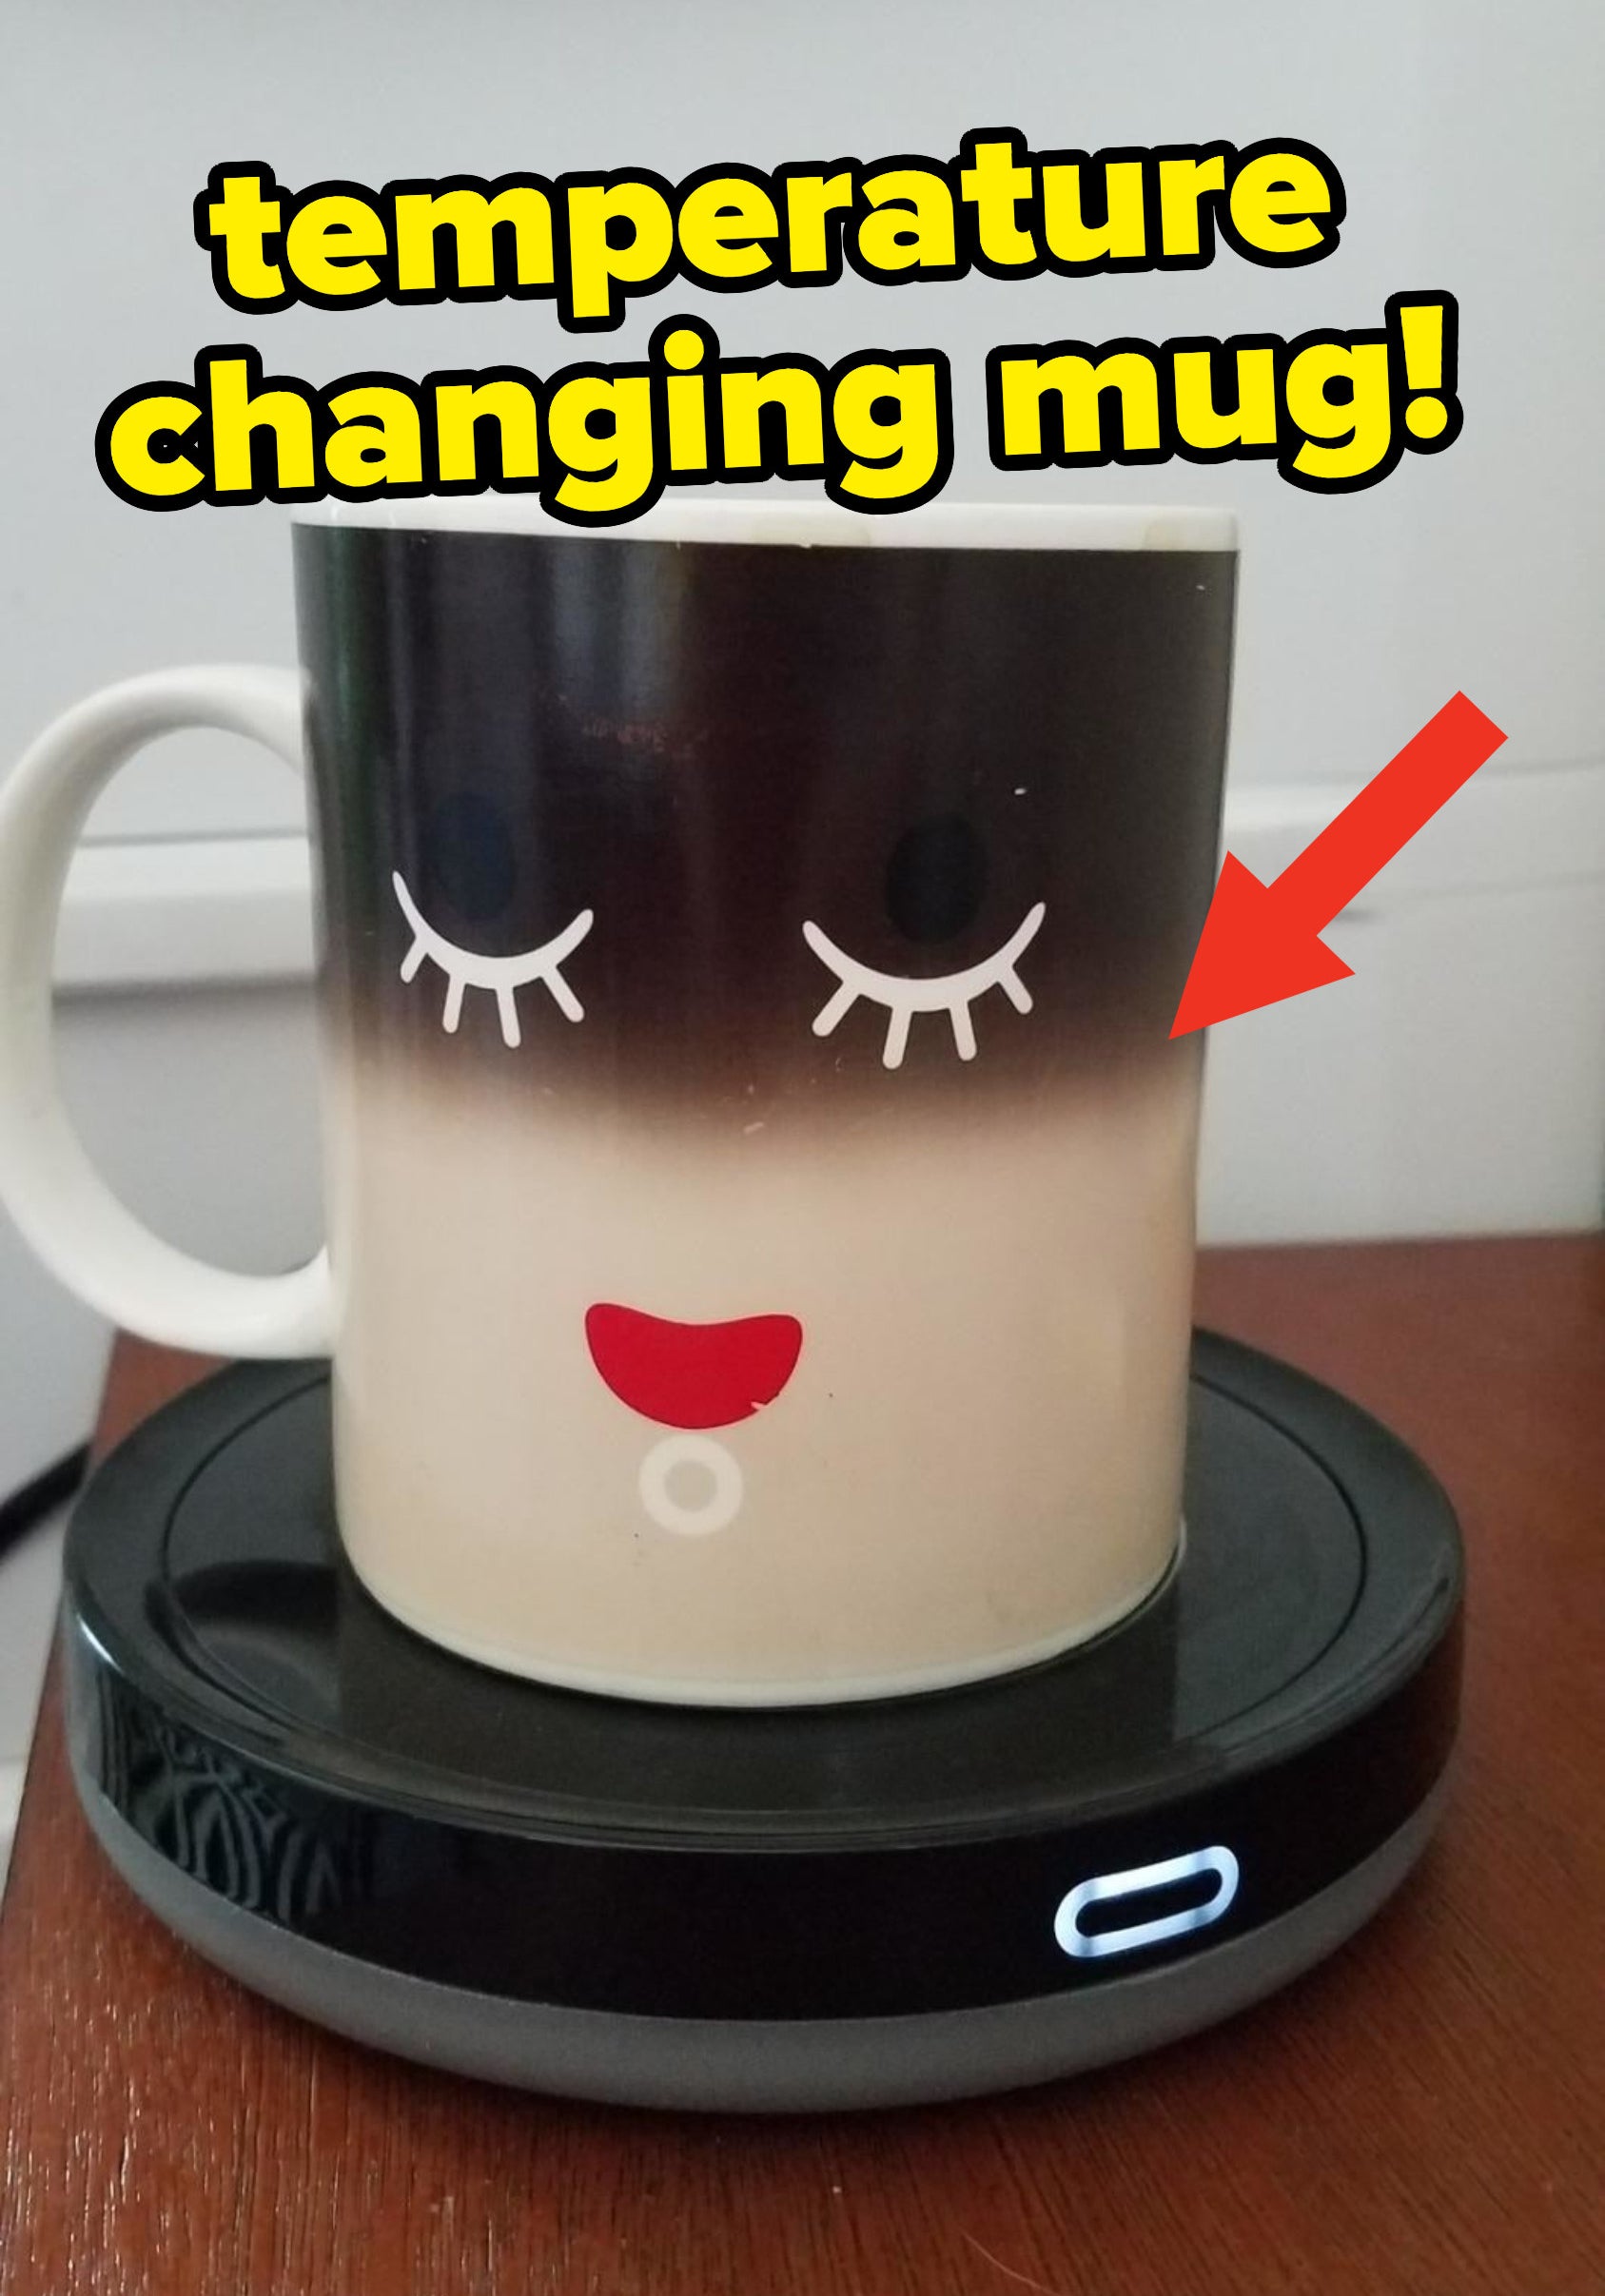 Reviewer photo of a temperature changing mug on top of a mug warmer, showing that the coffee inside is warm based on the color change